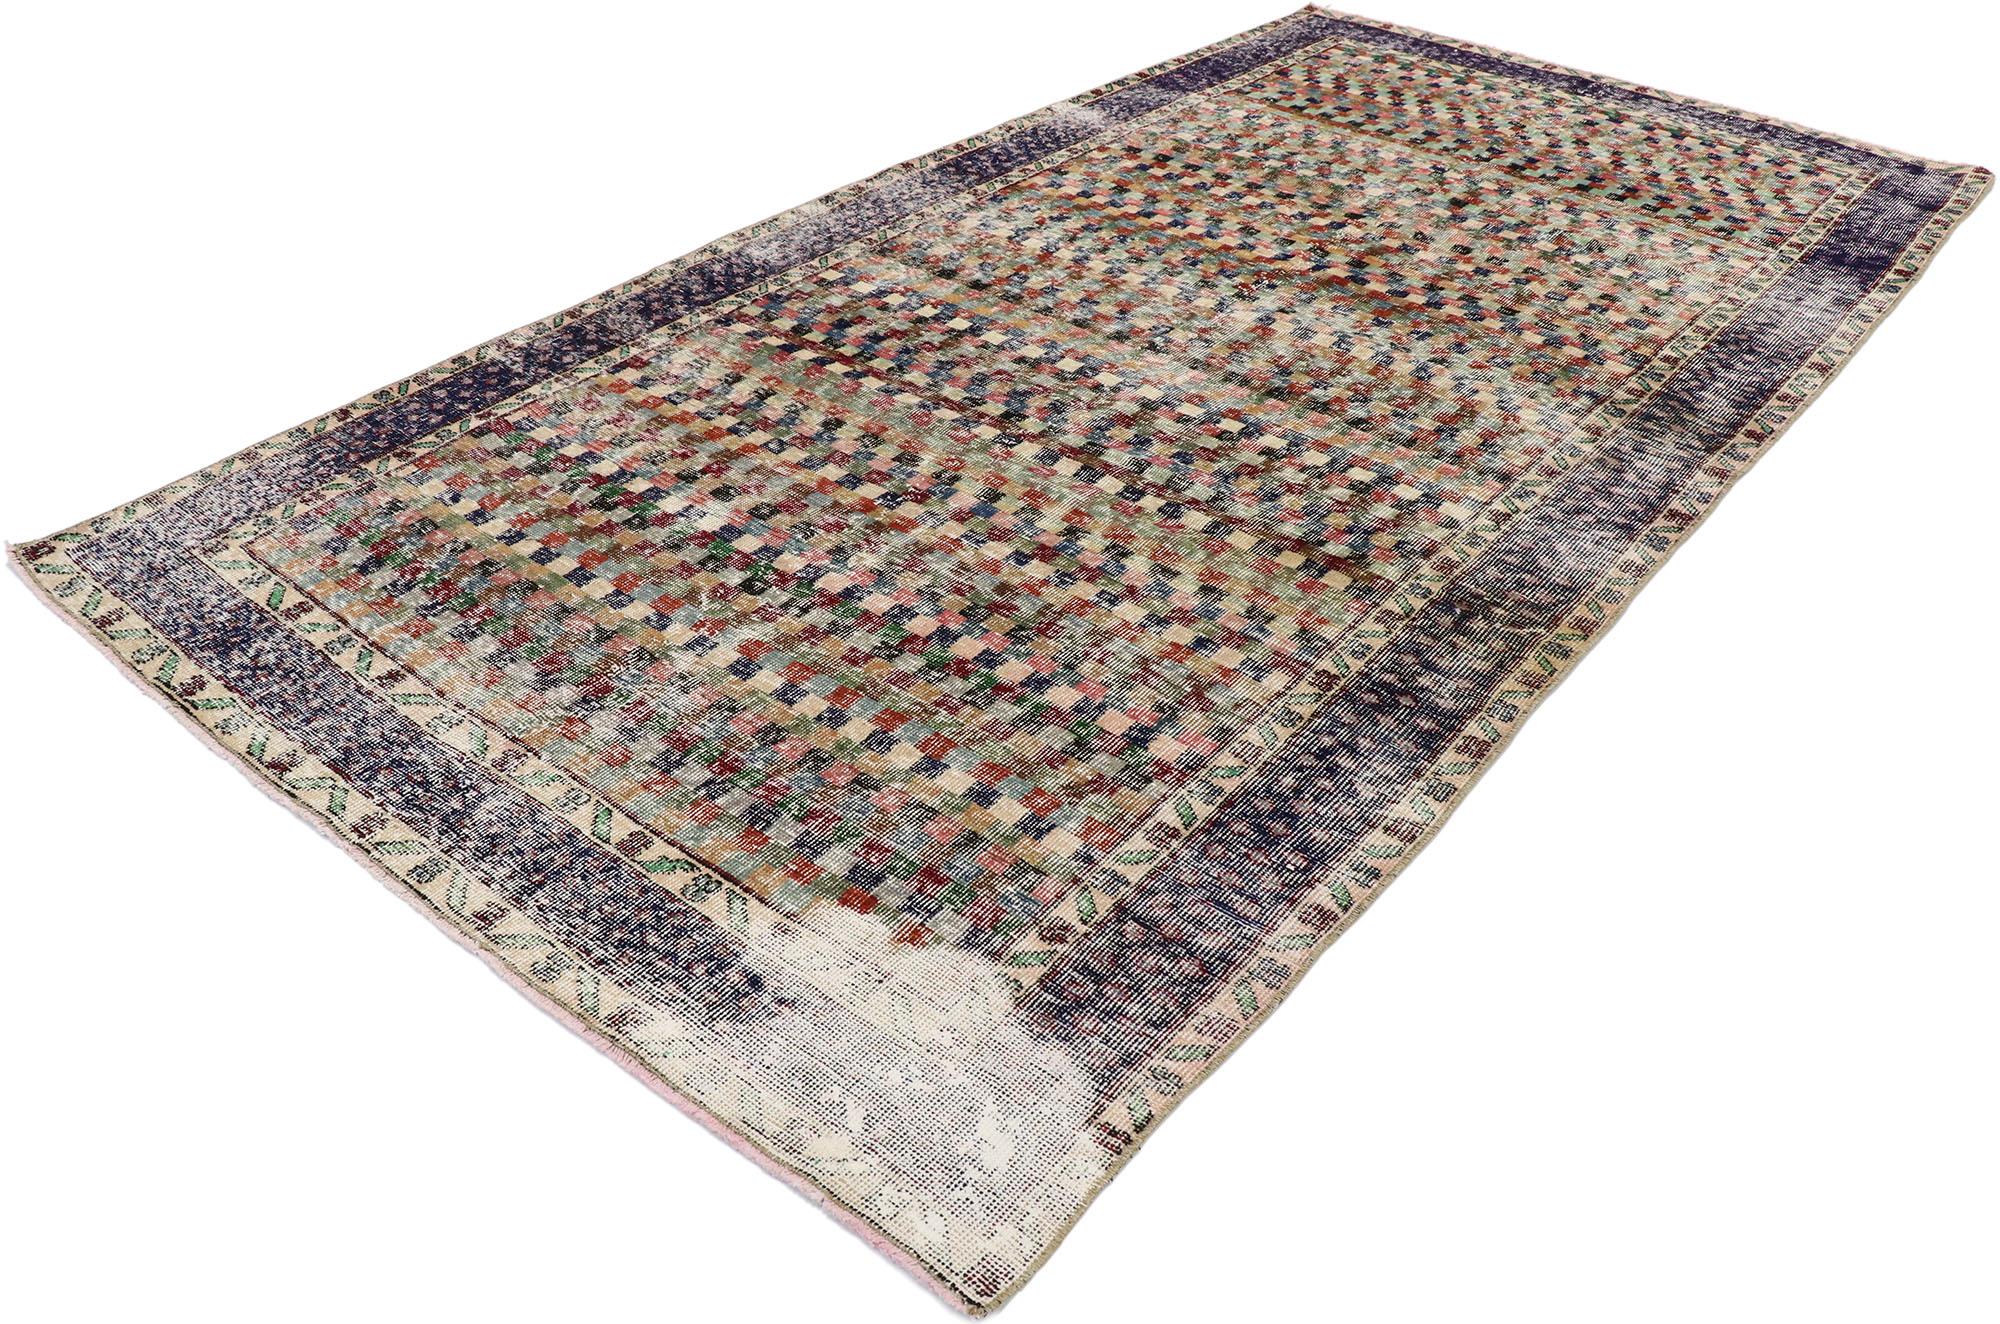 53311 Distressed Vintage Turkish Sivas Rug with Rustic Arts & Crafts Style. This hand knotted wool distressed vintage Turkish Sivas rug features an all-over checkered pattern comprised of multicolored cubes and squares. Gentle waves of abrash and